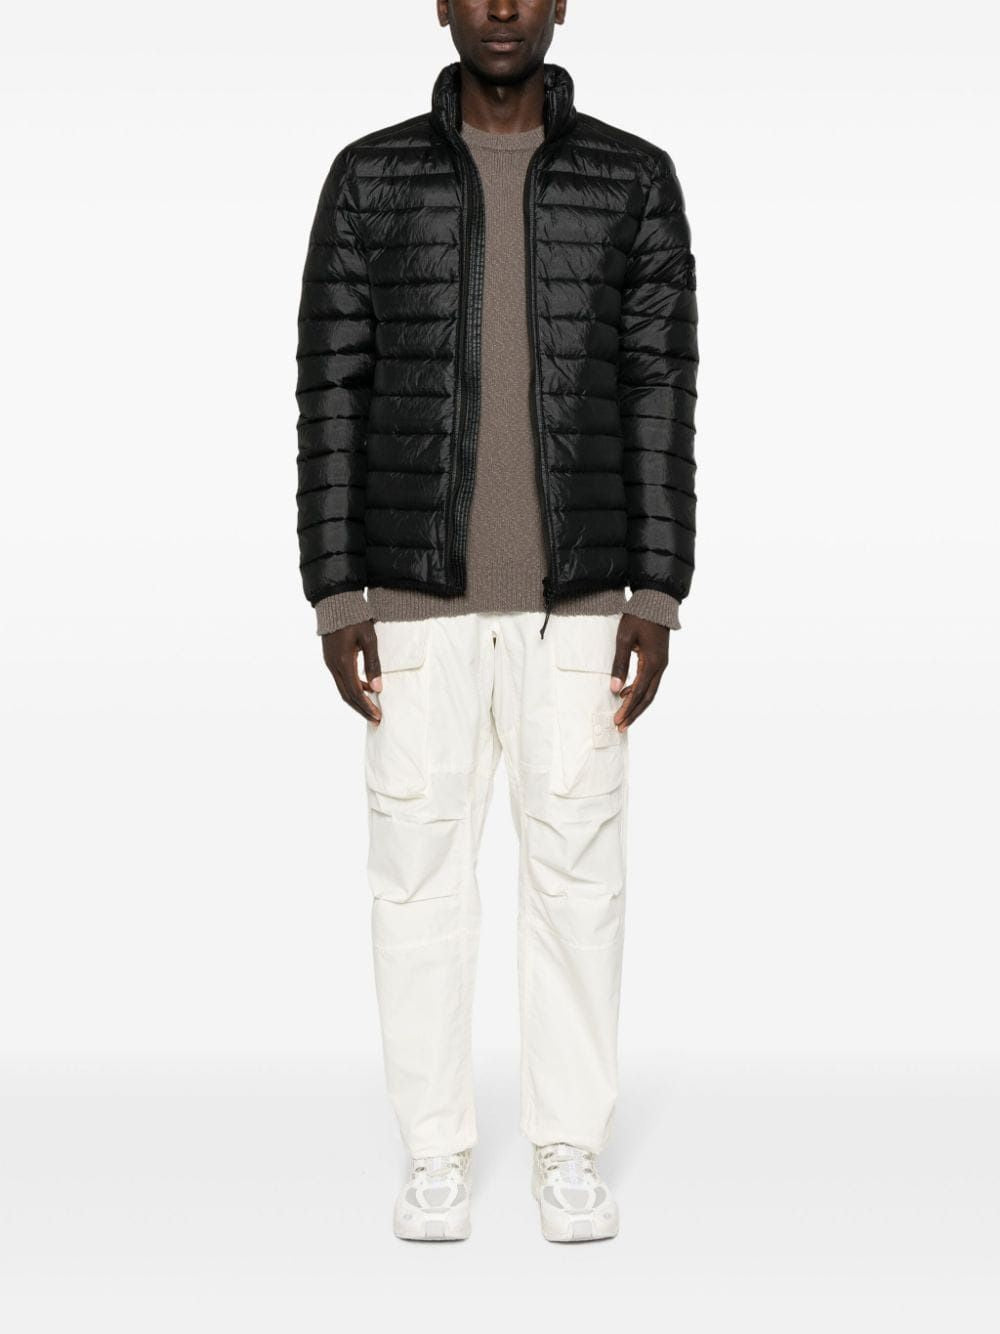 STONE ISLAND Black Lightweight Puffer Jacket for Men - SS24 Collection